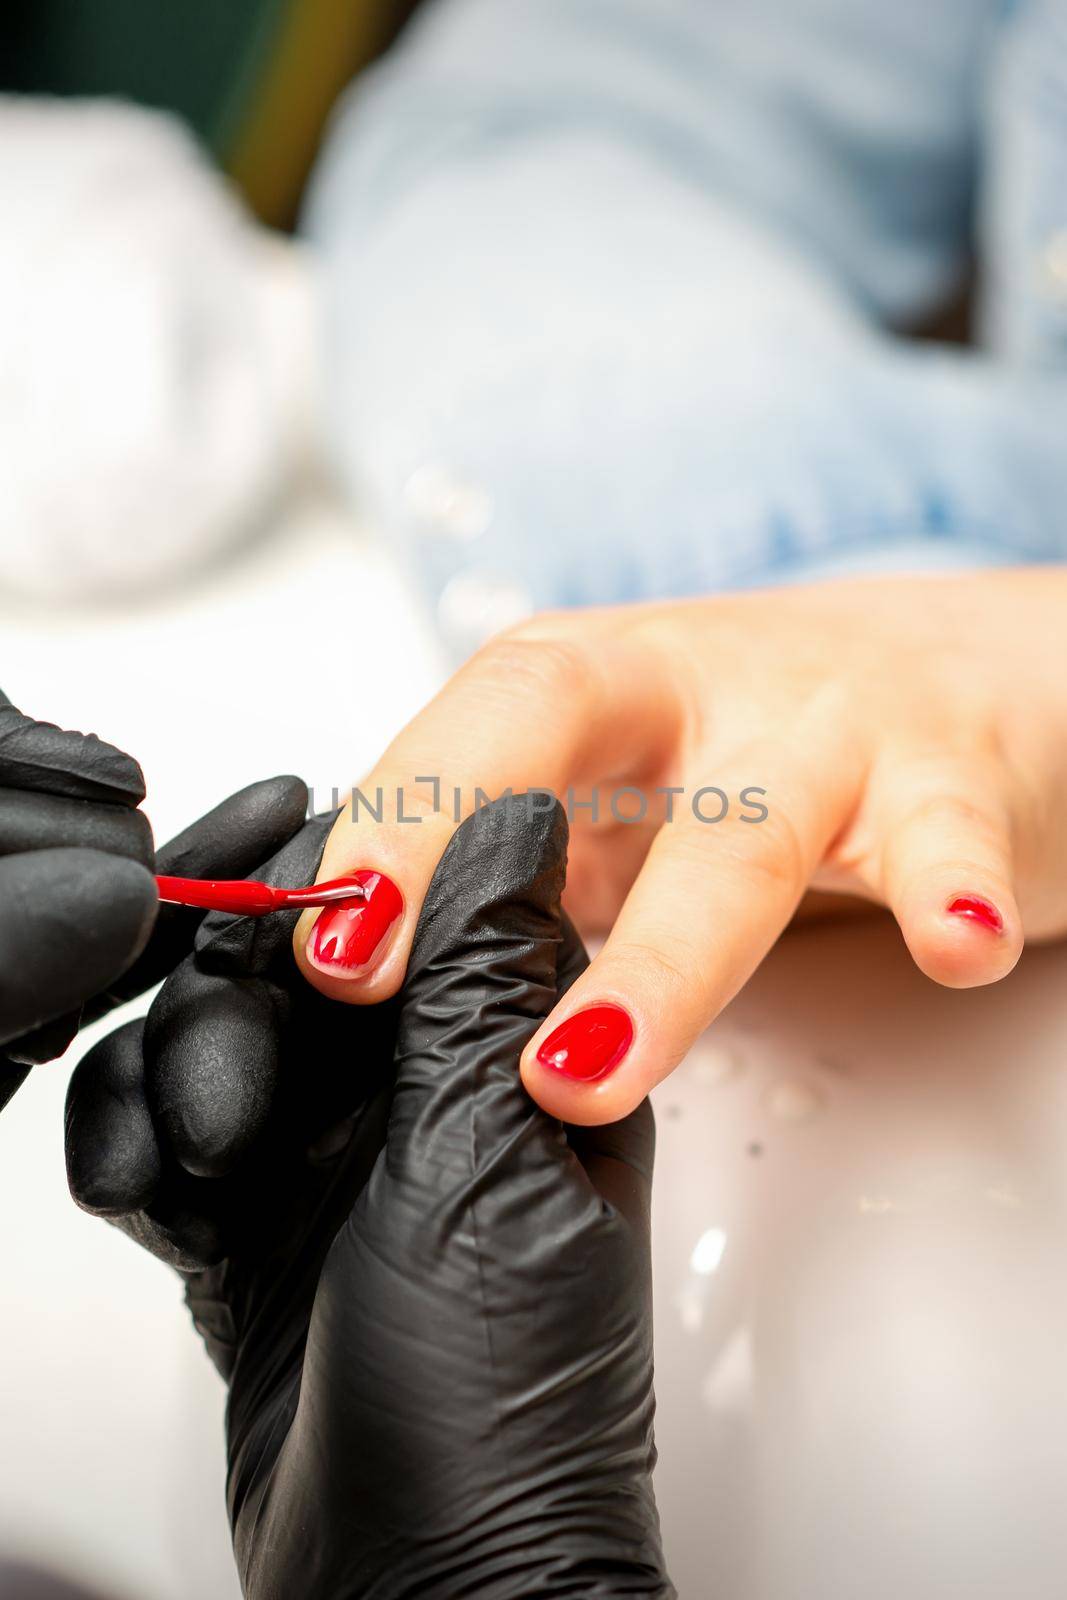 Manicure varnish painting. Close-up of a manicure master wearing rubber black gloves applying red varnish on a female fingernail in the beauty salon. by okskukuruza